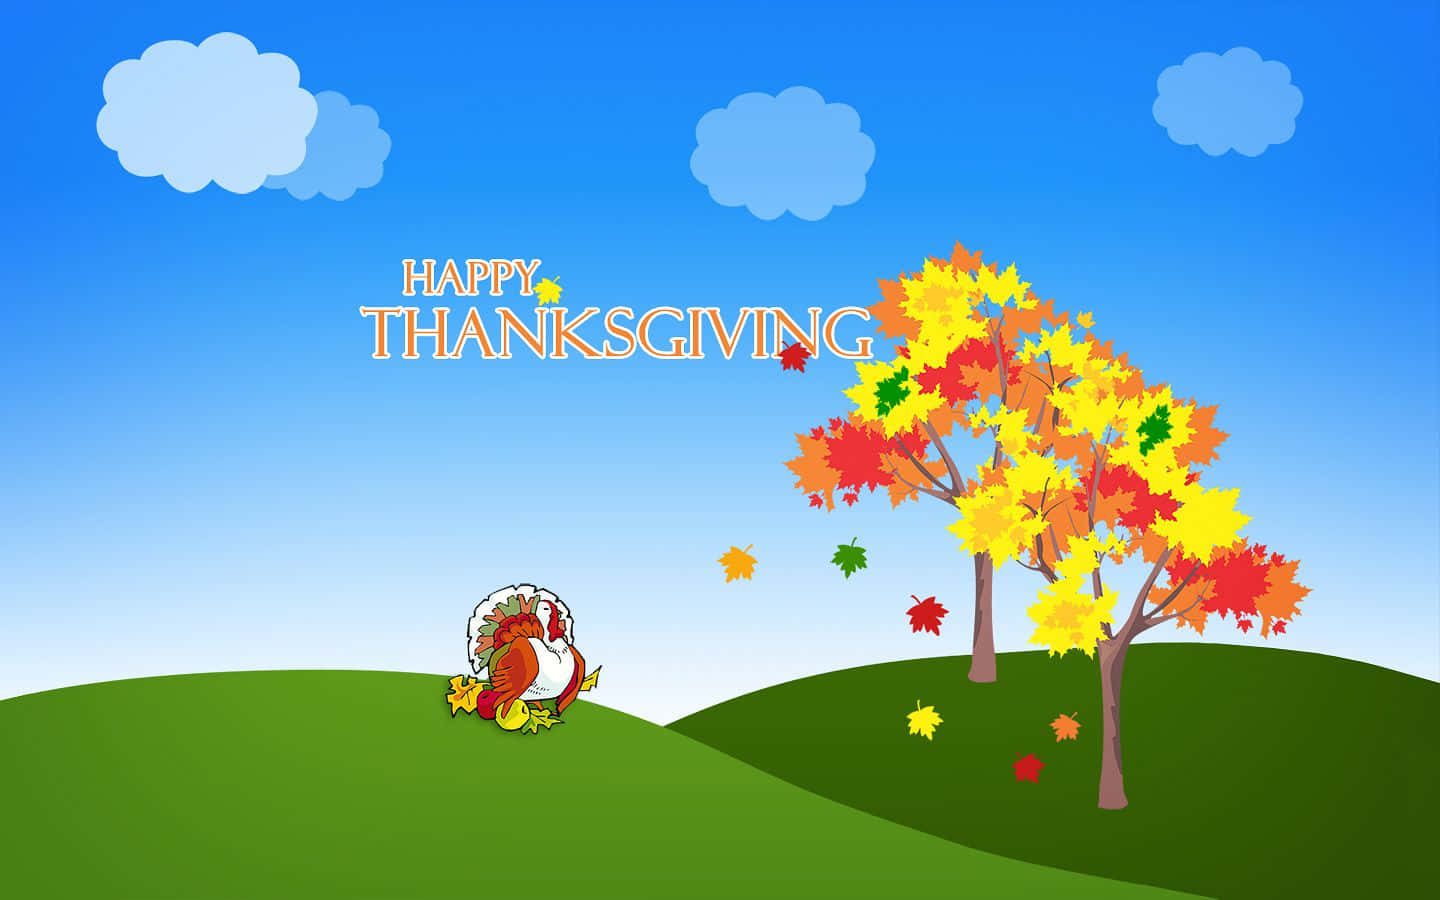 Have A Funny Thanksgiving Holiday With Friends And Family!